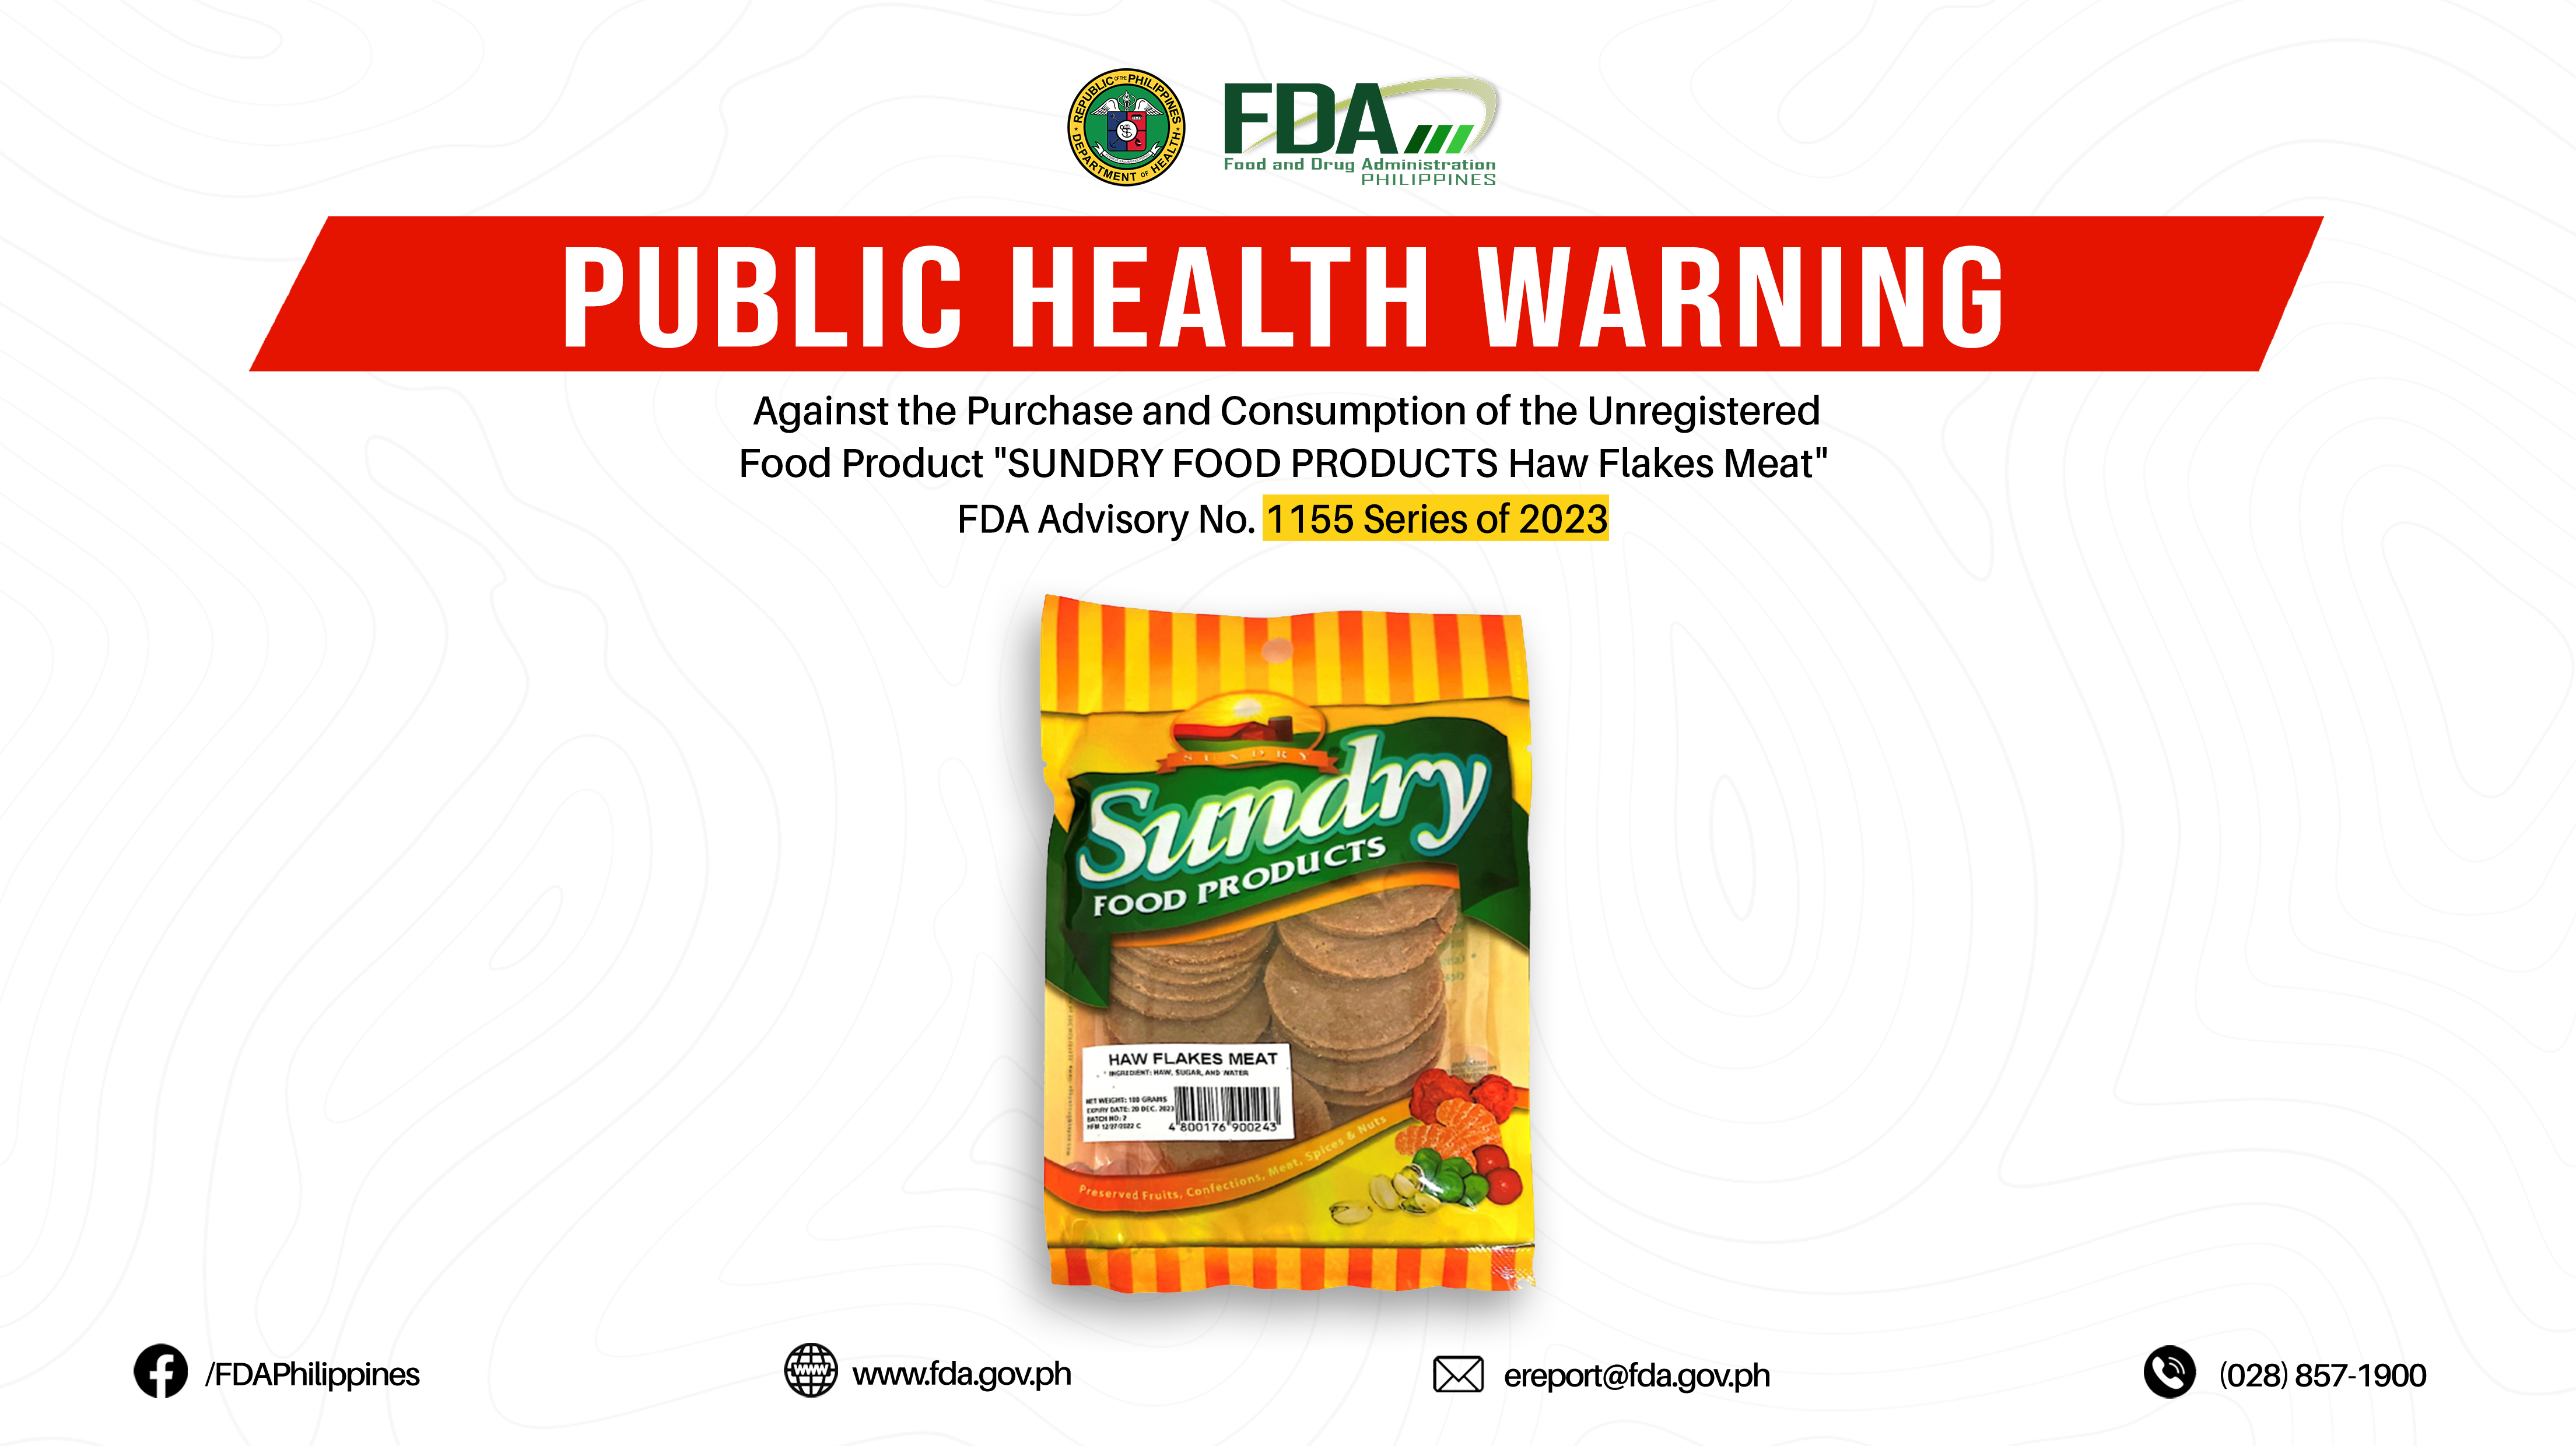 FDA Advisory No.2023-1155 || Public Health Warning Against the Purchase and Consumption of the Unregistered Food Product “SUNDRY FOOD PRODUCTS Haw Flakes Meat”